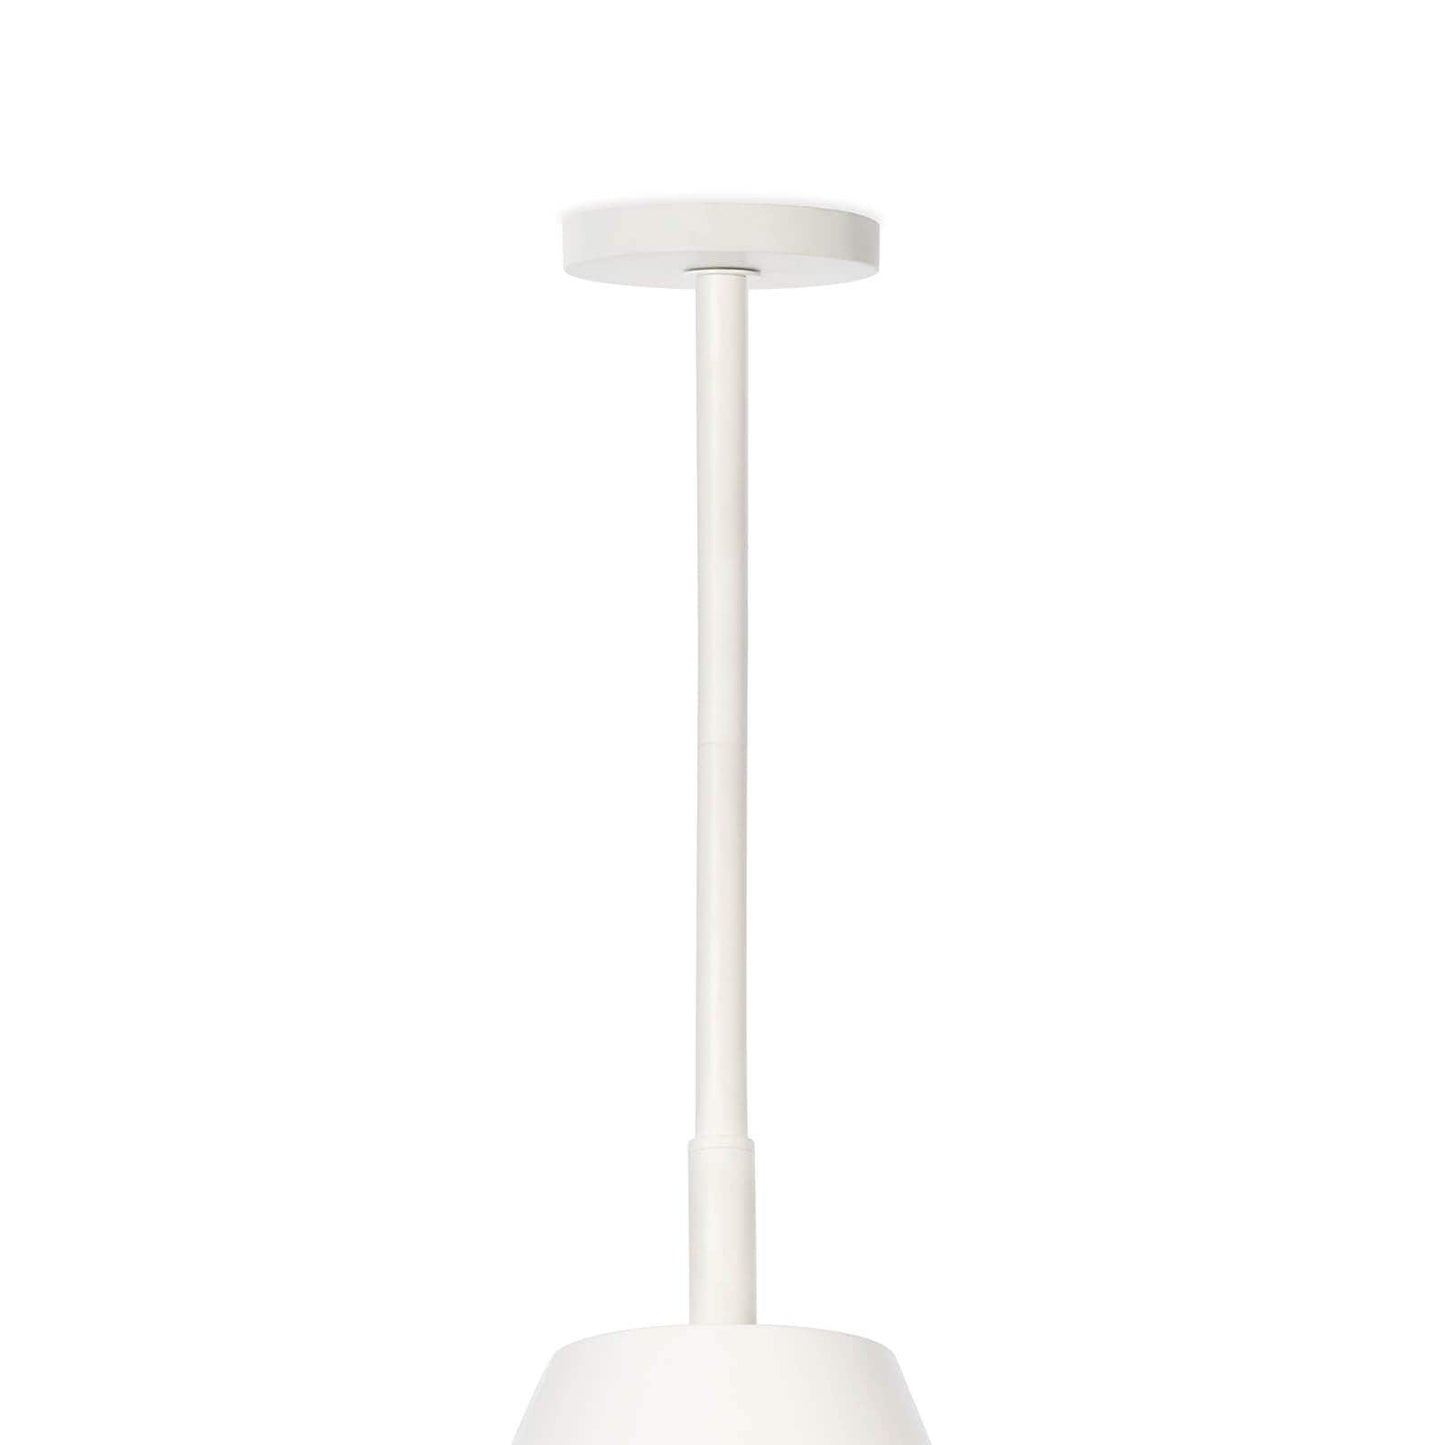 Bluff Outdoor Pendant in White by Regina Andrew